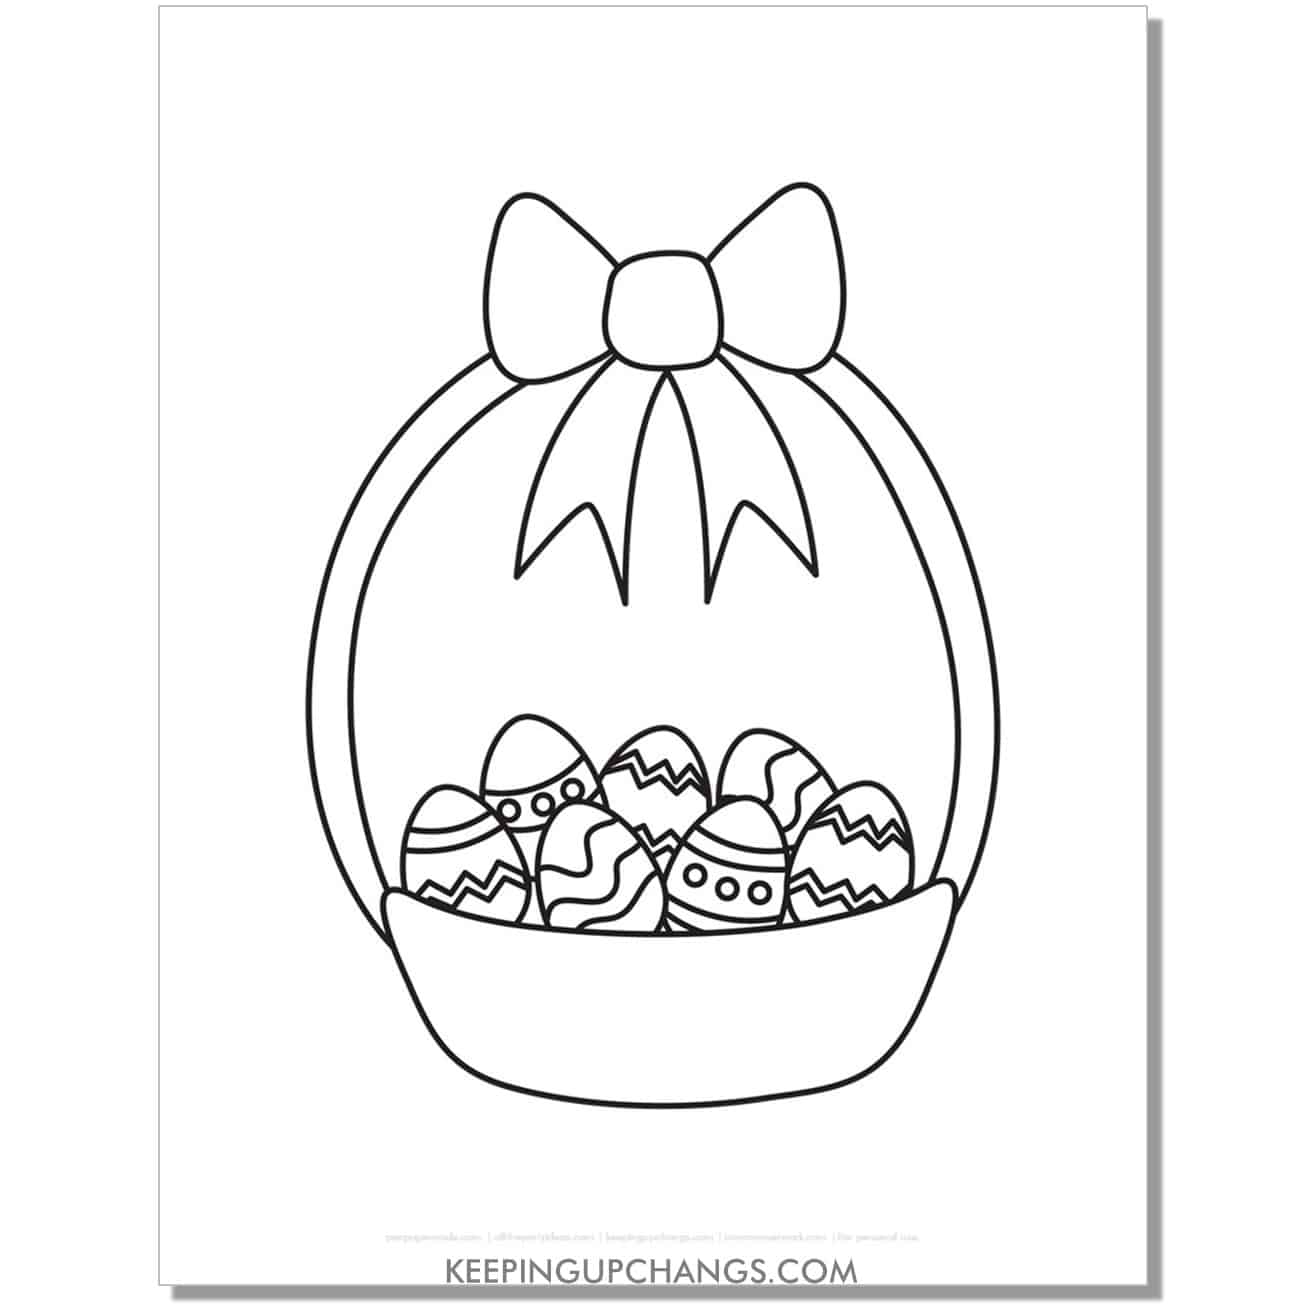 Easter basket with lots of cute eggs coloring page, sheet.